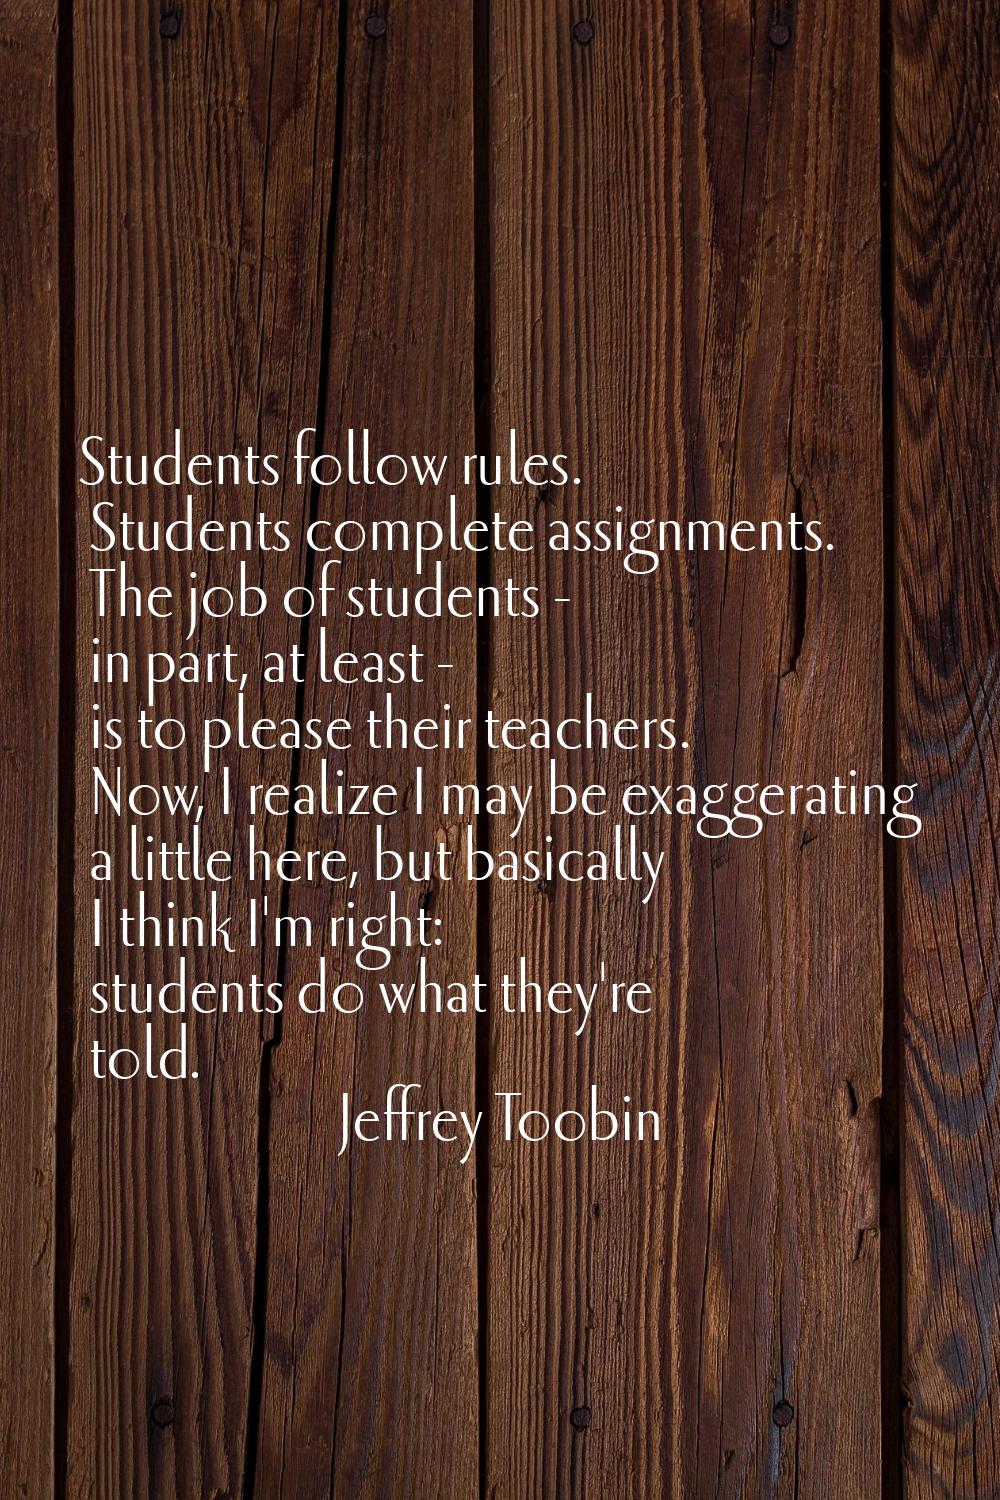 Students follow rules. Students complete assignments. The job of students - in part, at least - is 